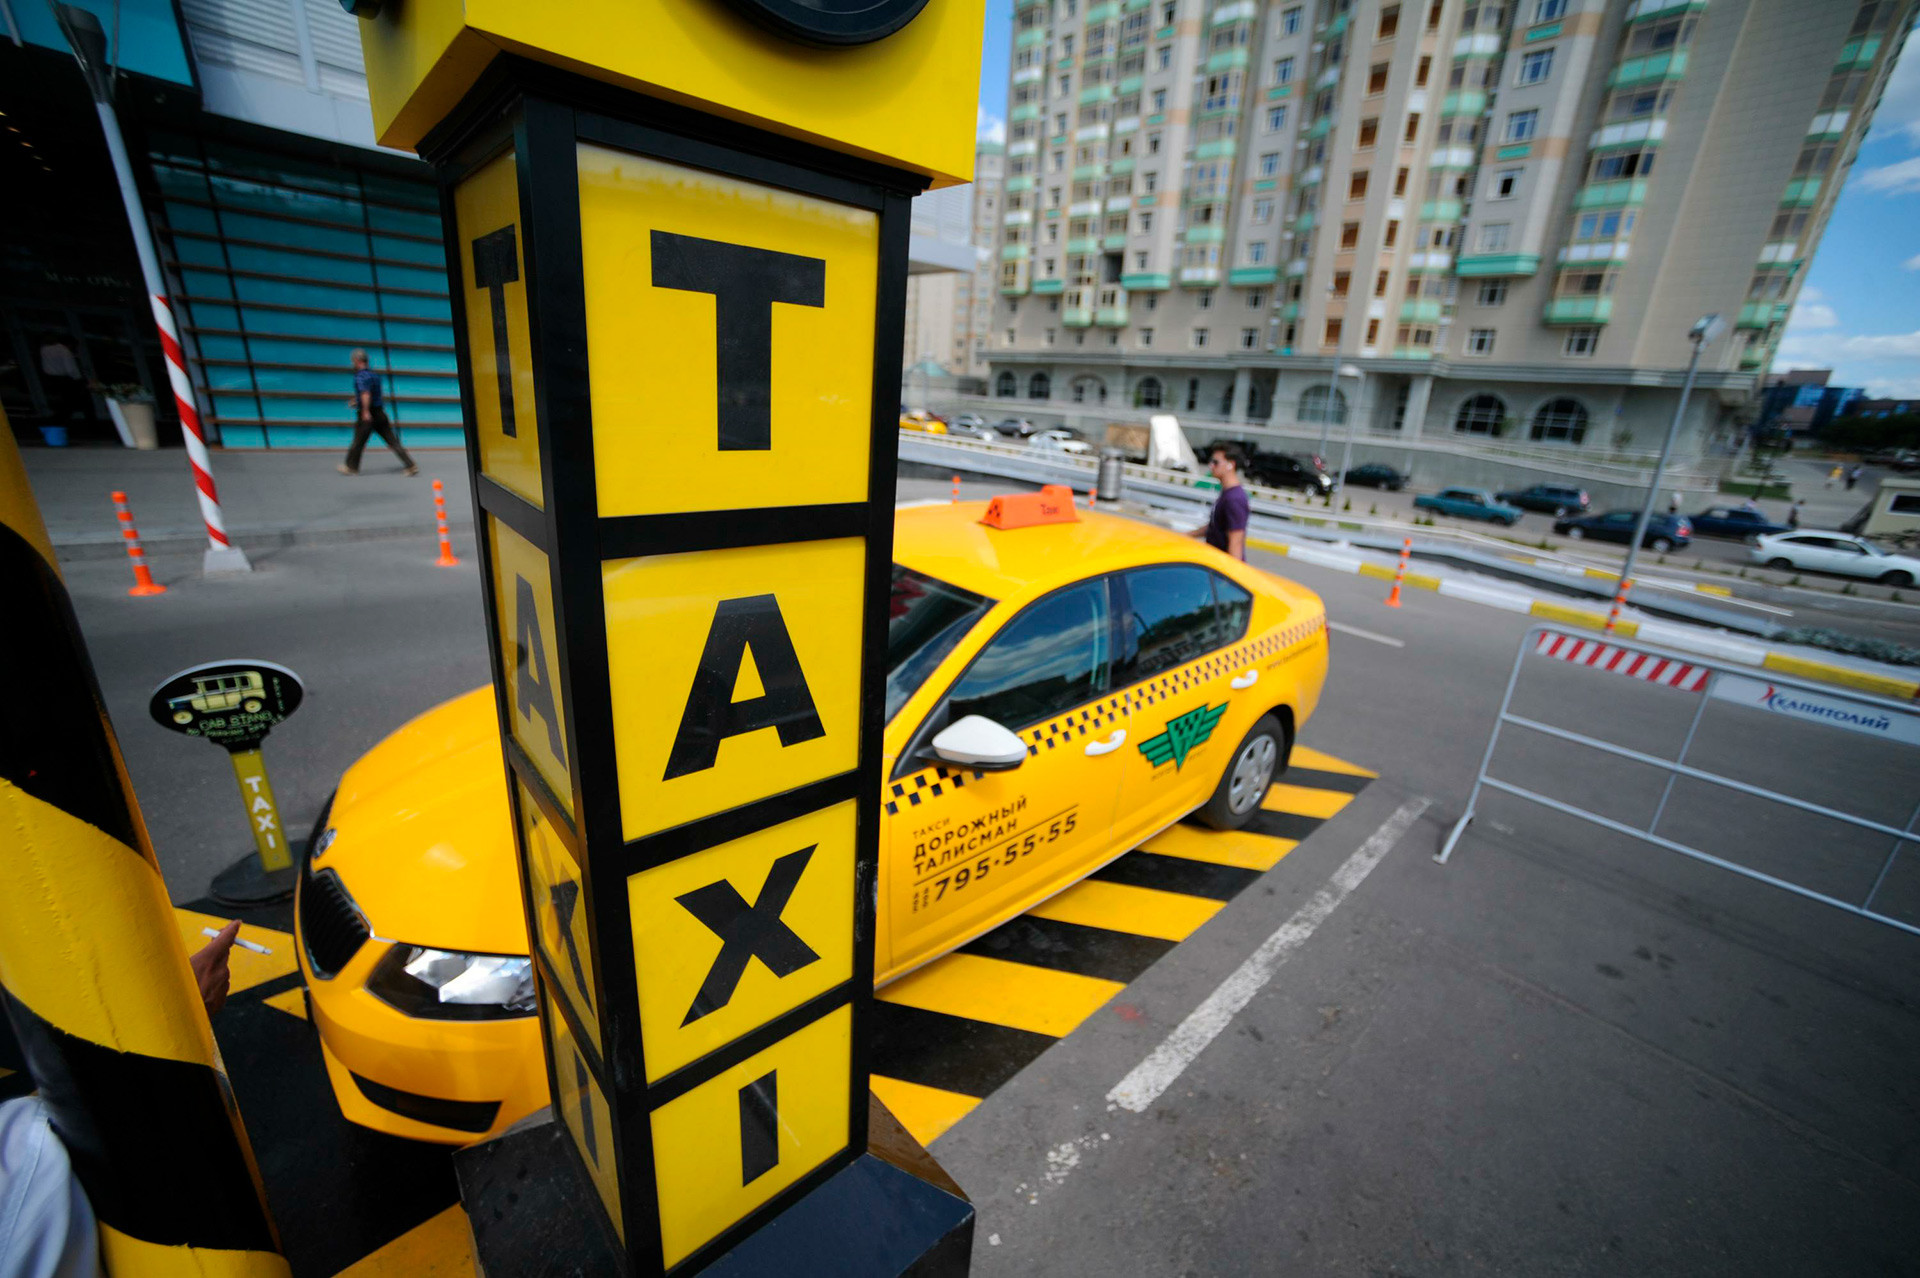 A taxi cab parking in Moscow.